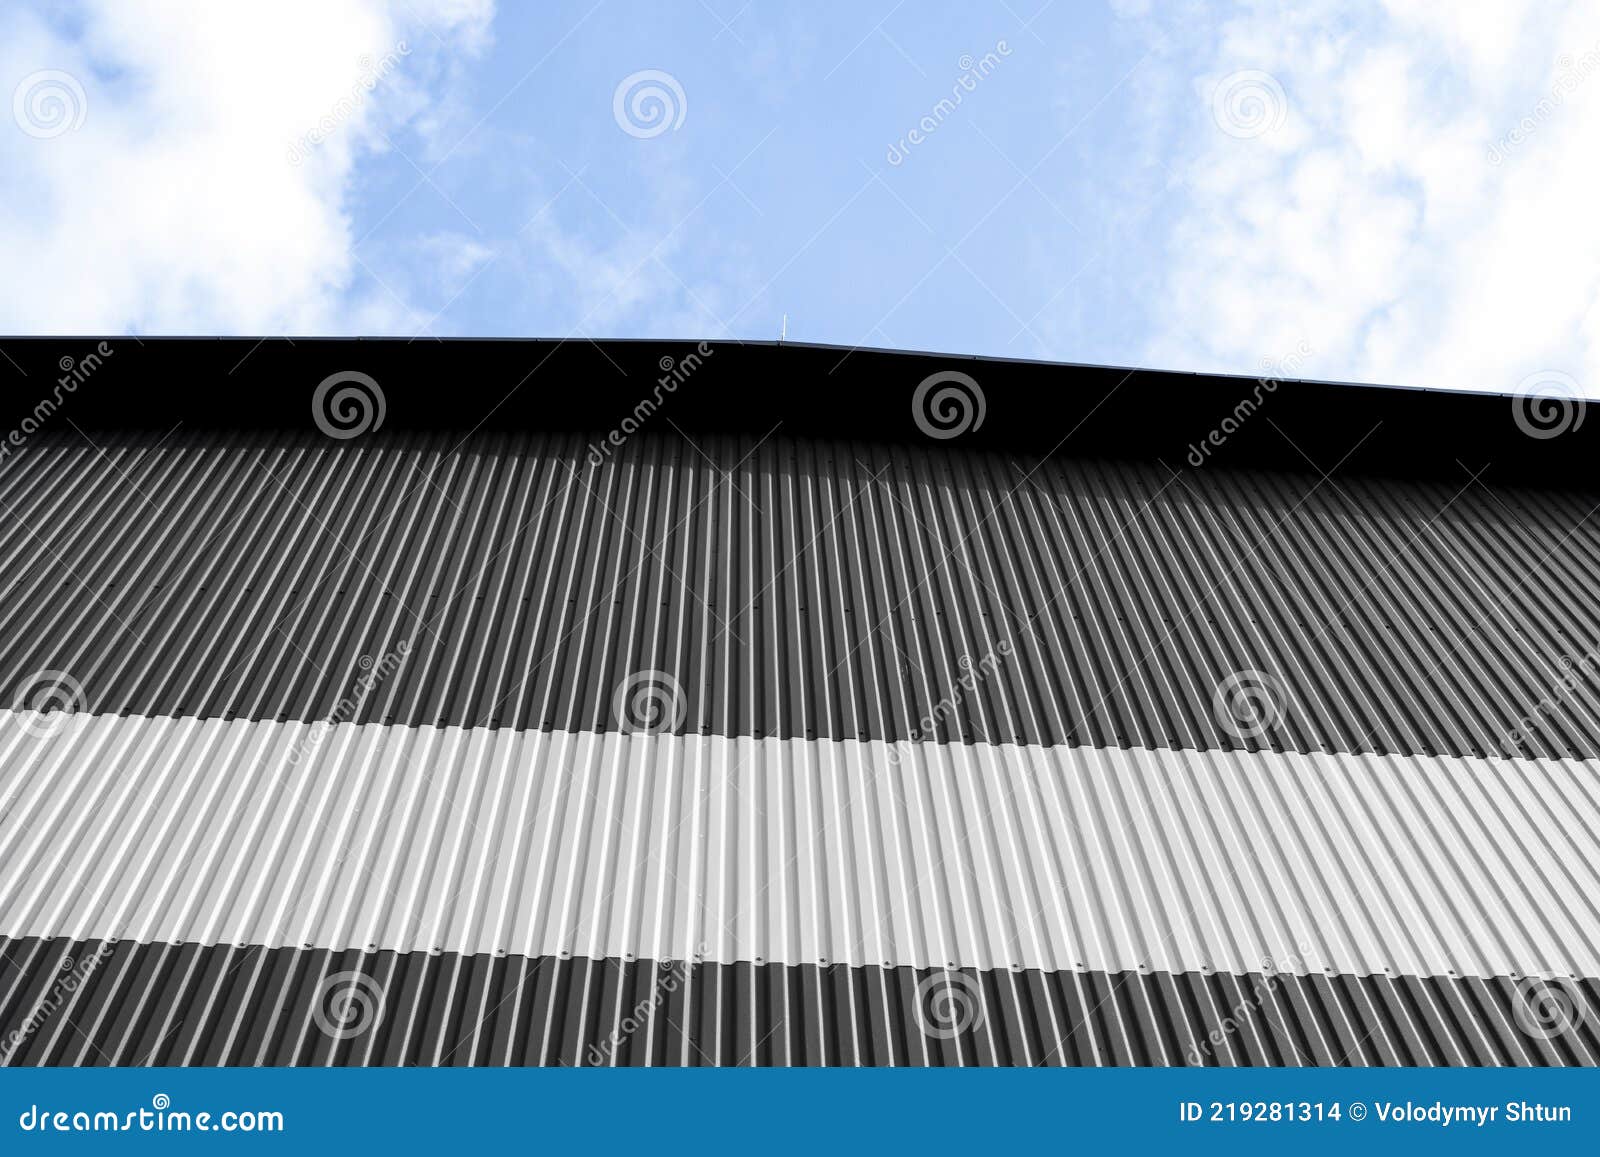 Black and White Corrugated Iron Sheet Used As a Facade of a Warehouse ...